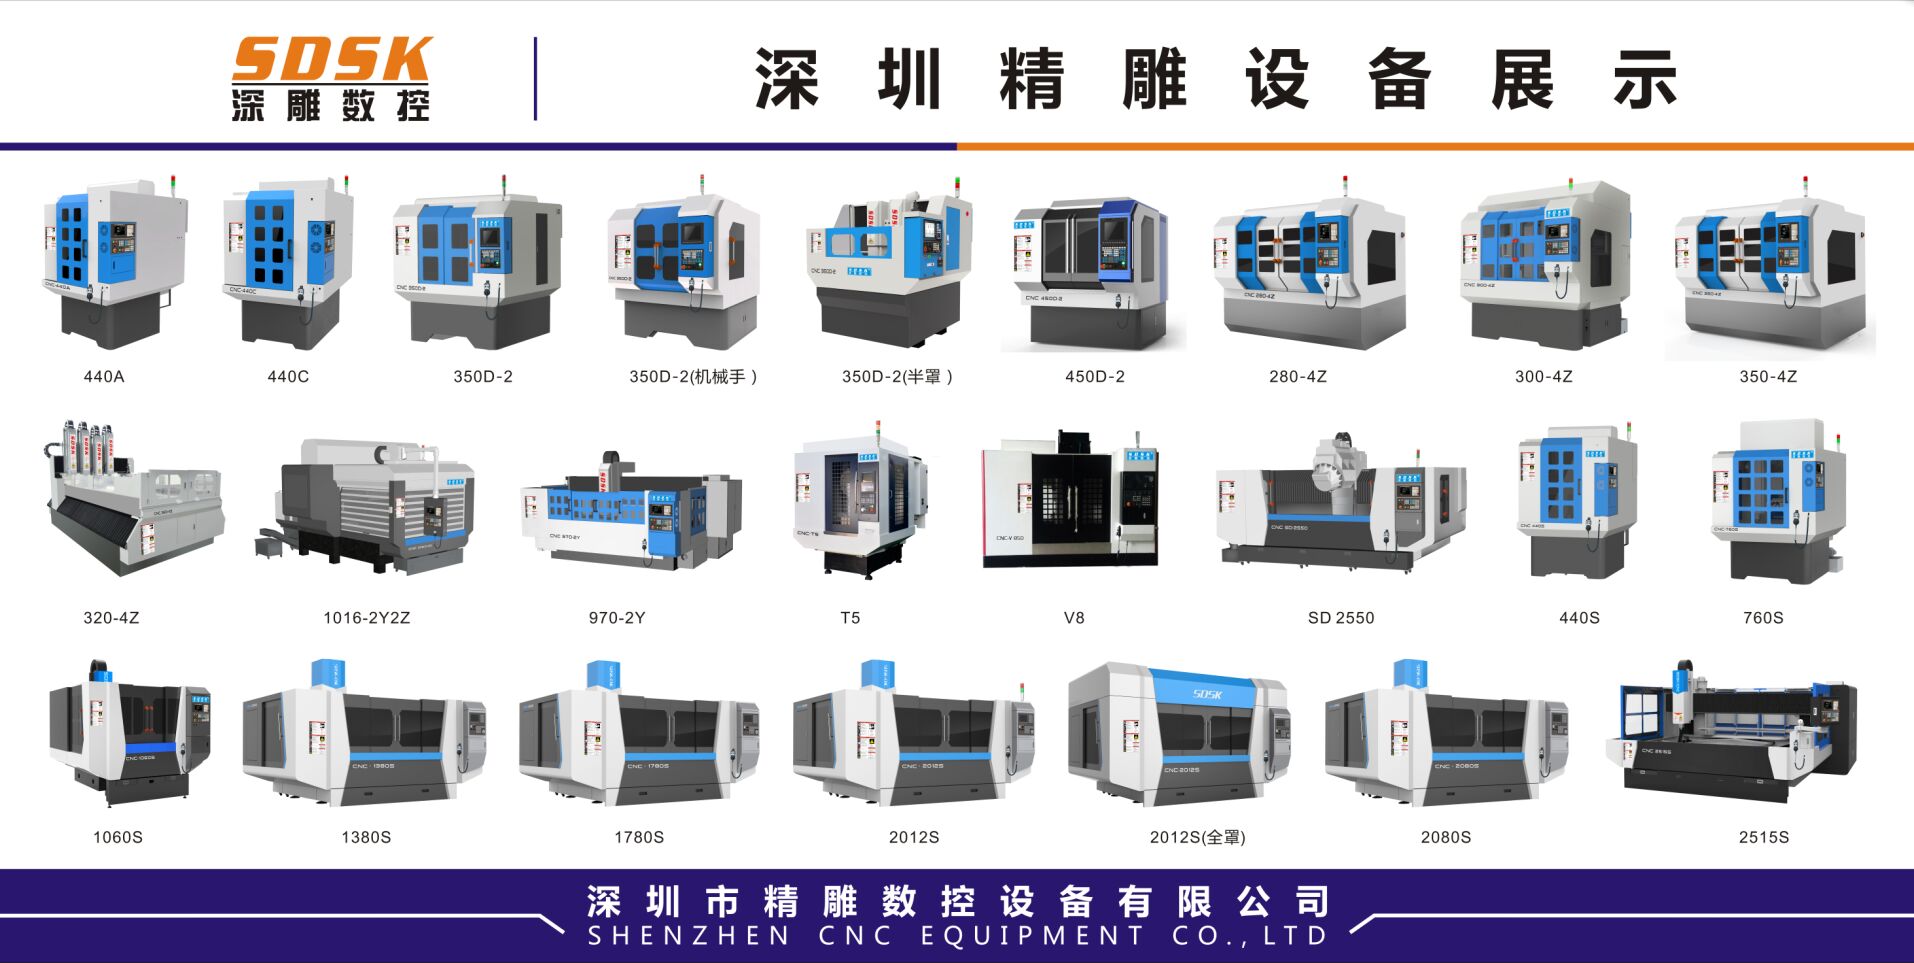 In September, two new products were developed, and the new product processing areas include (large and small precision carving machine series: CNC precision carving machine, glass precision carving ma